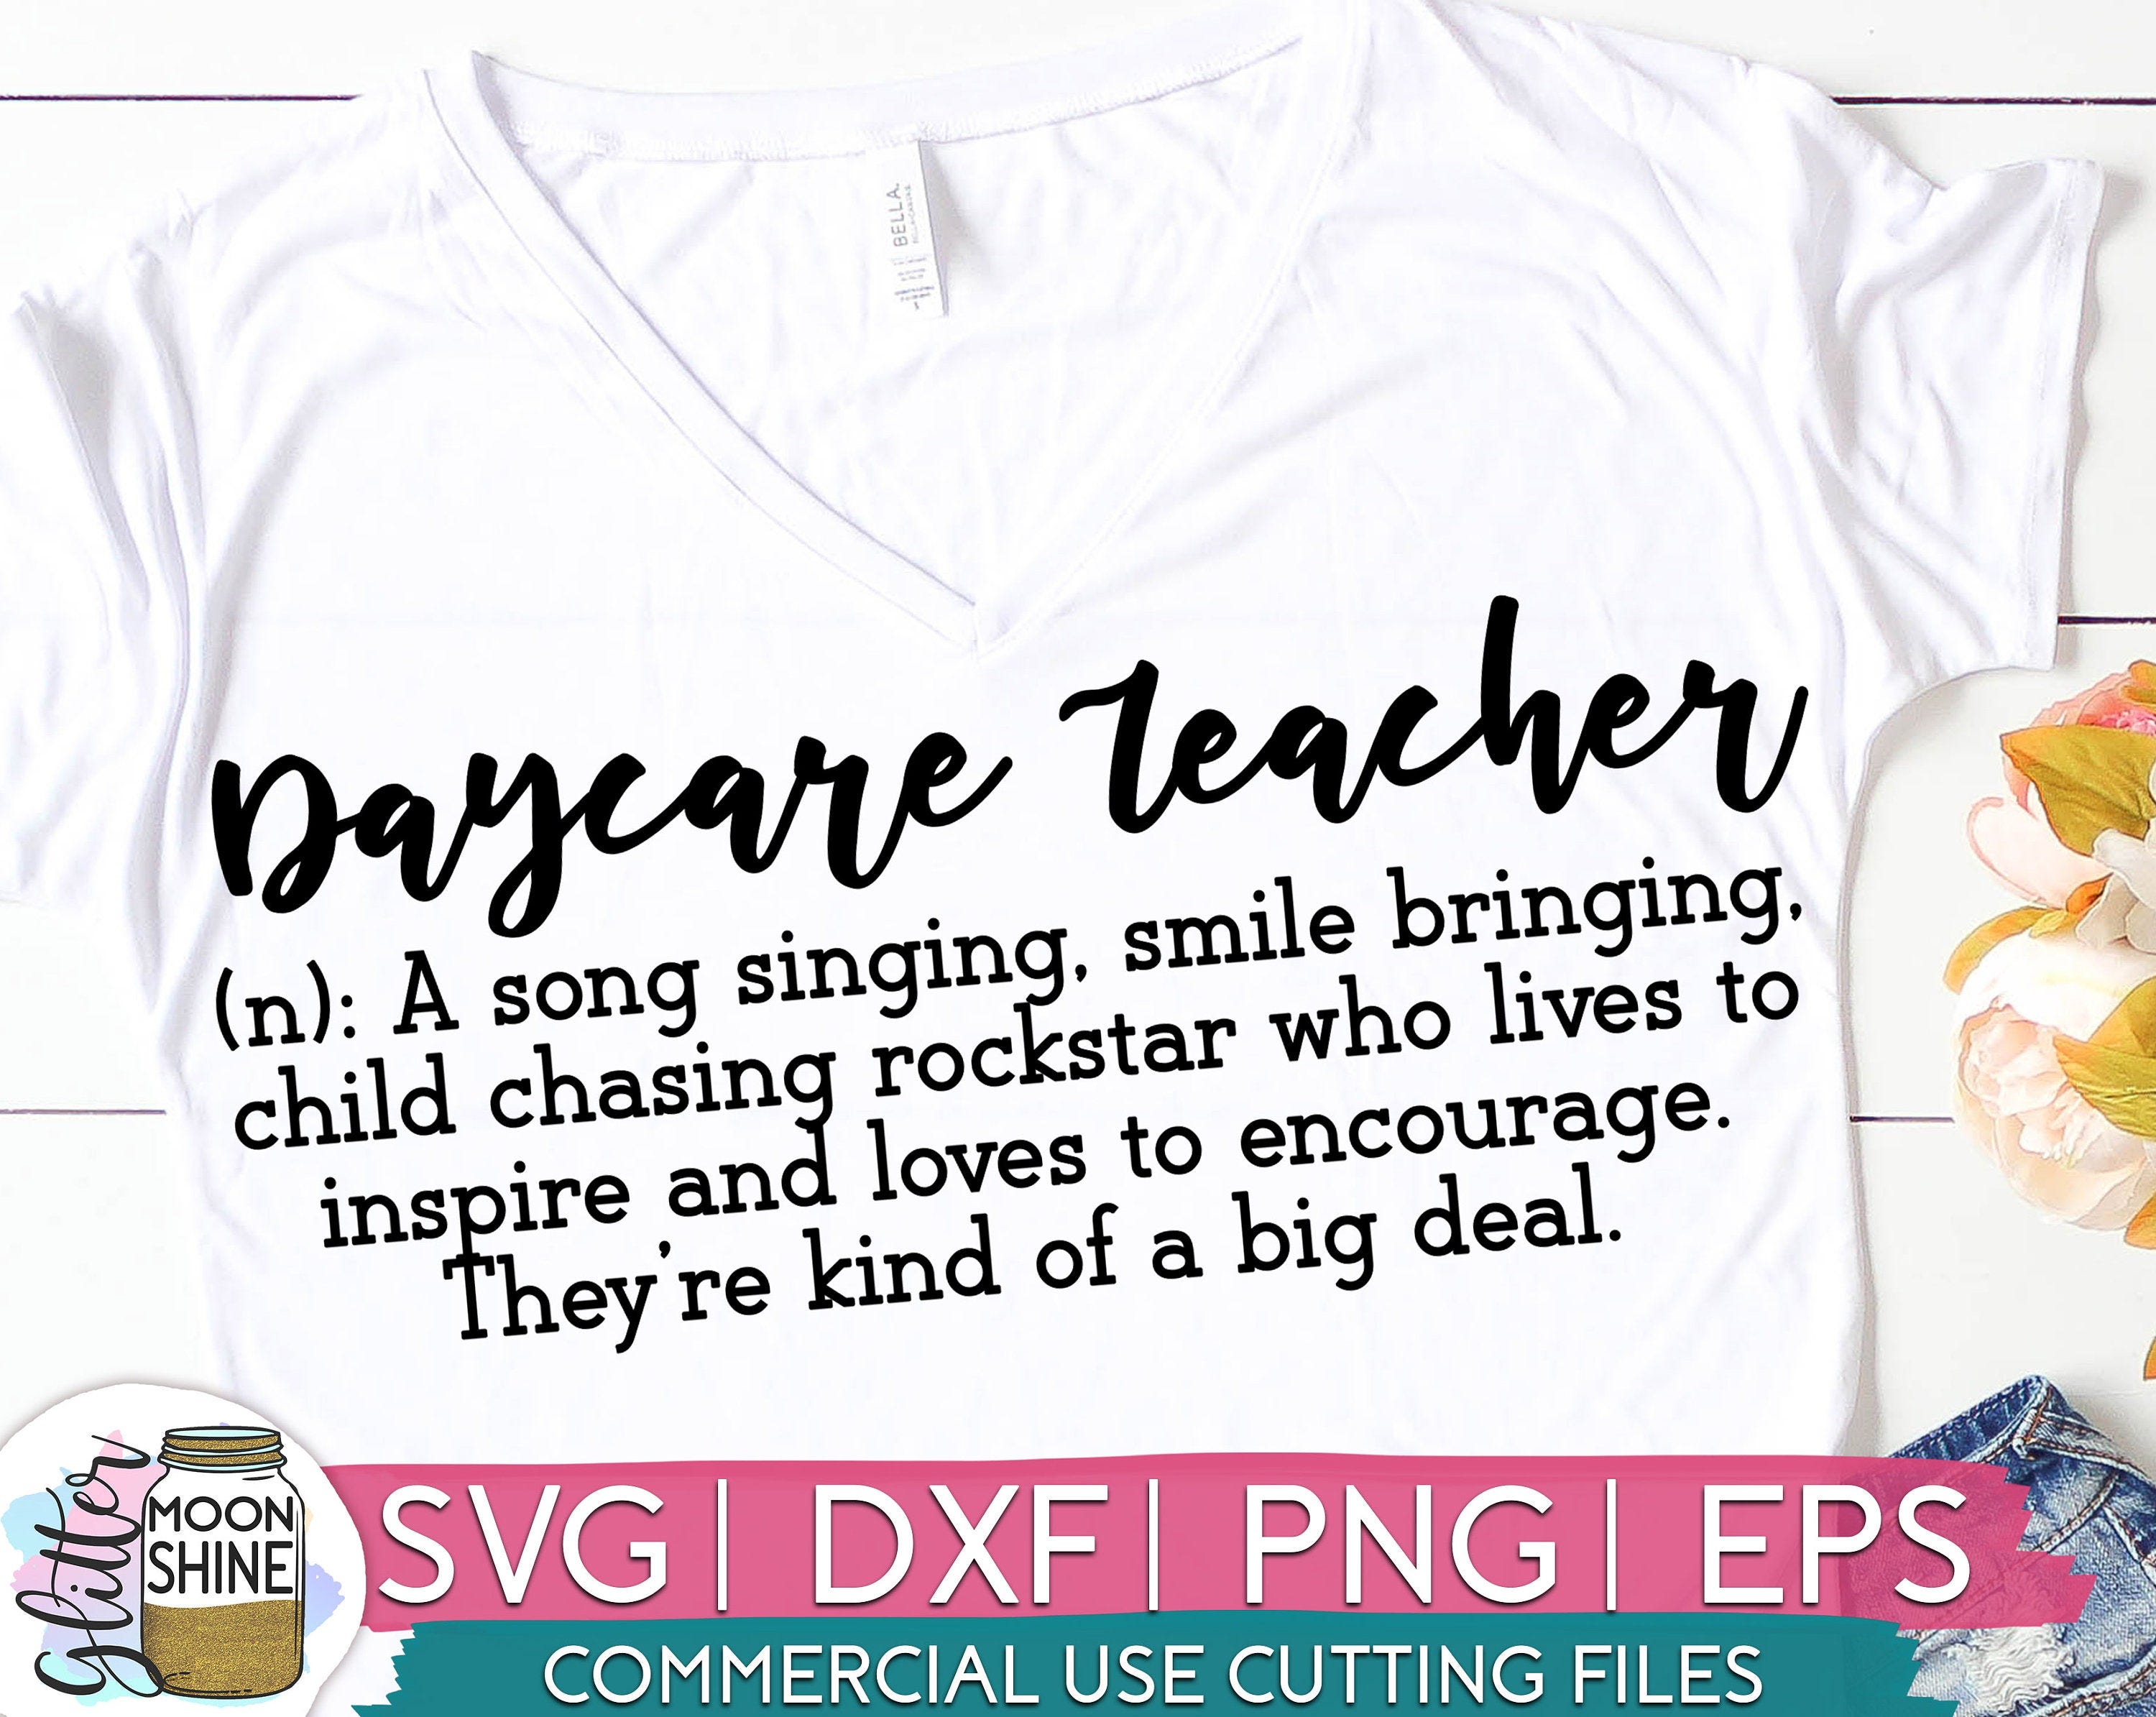 Daycare Teacher Definition svg eps dxf png cutting files for silhouette cameo cricut, Teaching, Back to School, Teacher Quotes and Saying